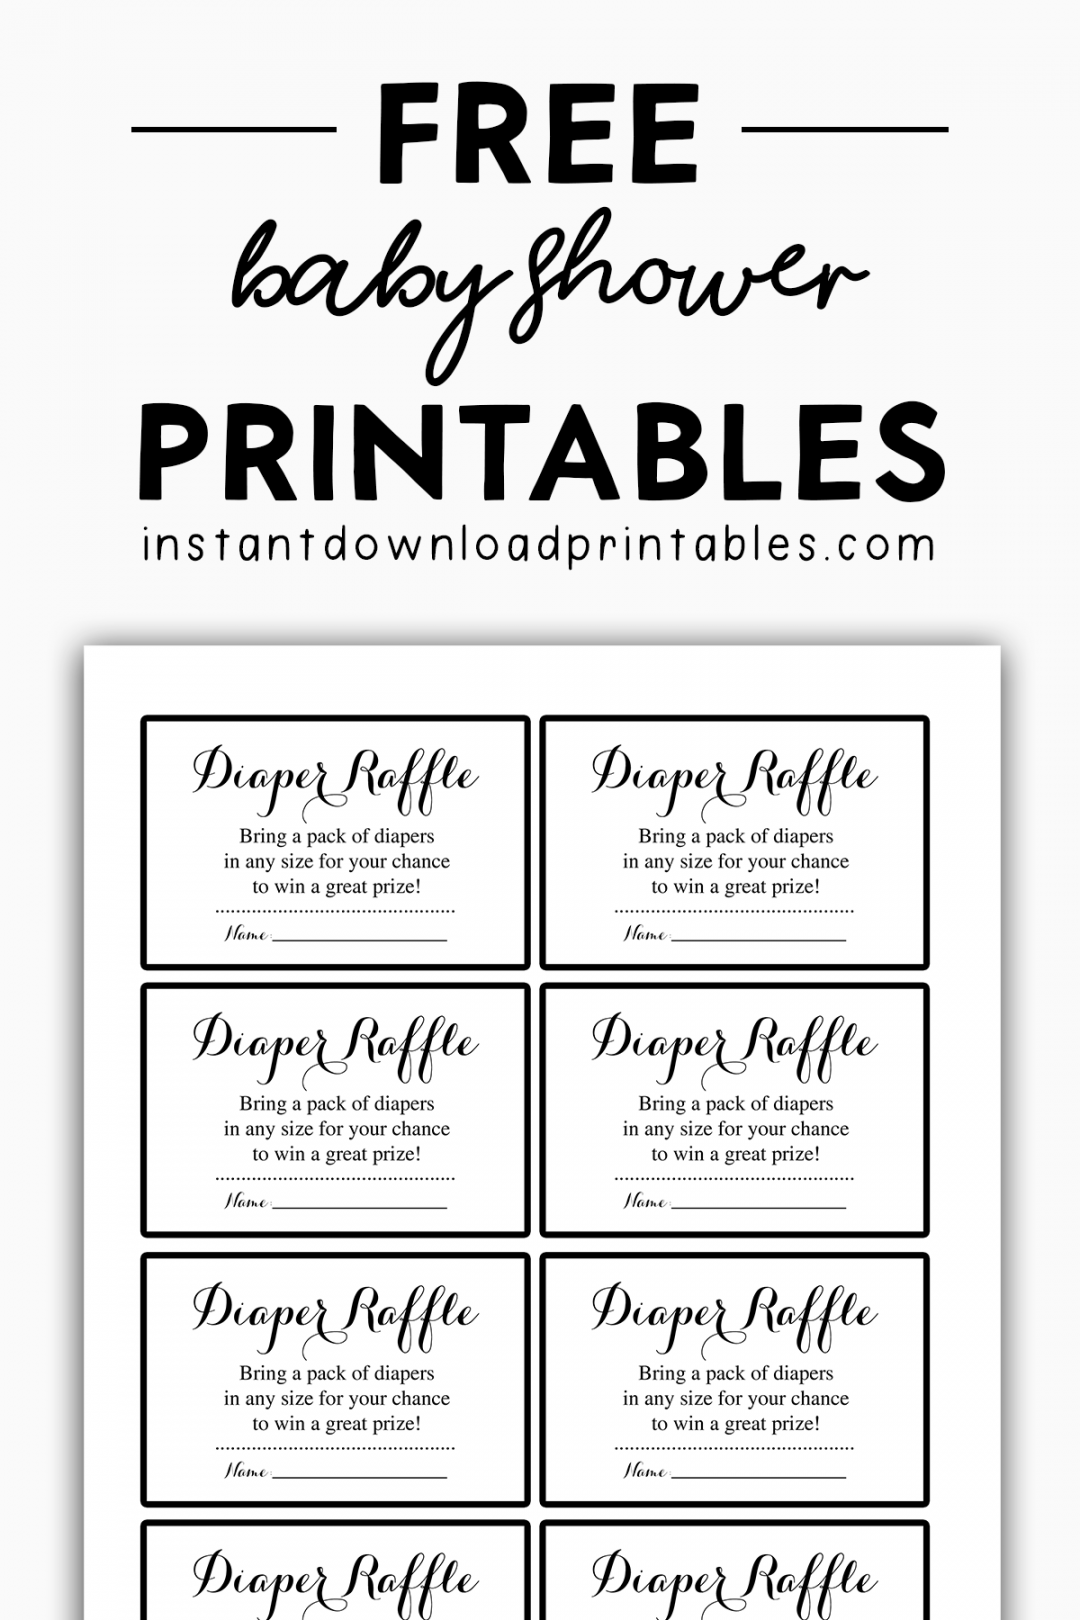 Free Baby Shower Black and White Printables - Instant Download  - FREE Printables - Diaper Raffle Printable Free